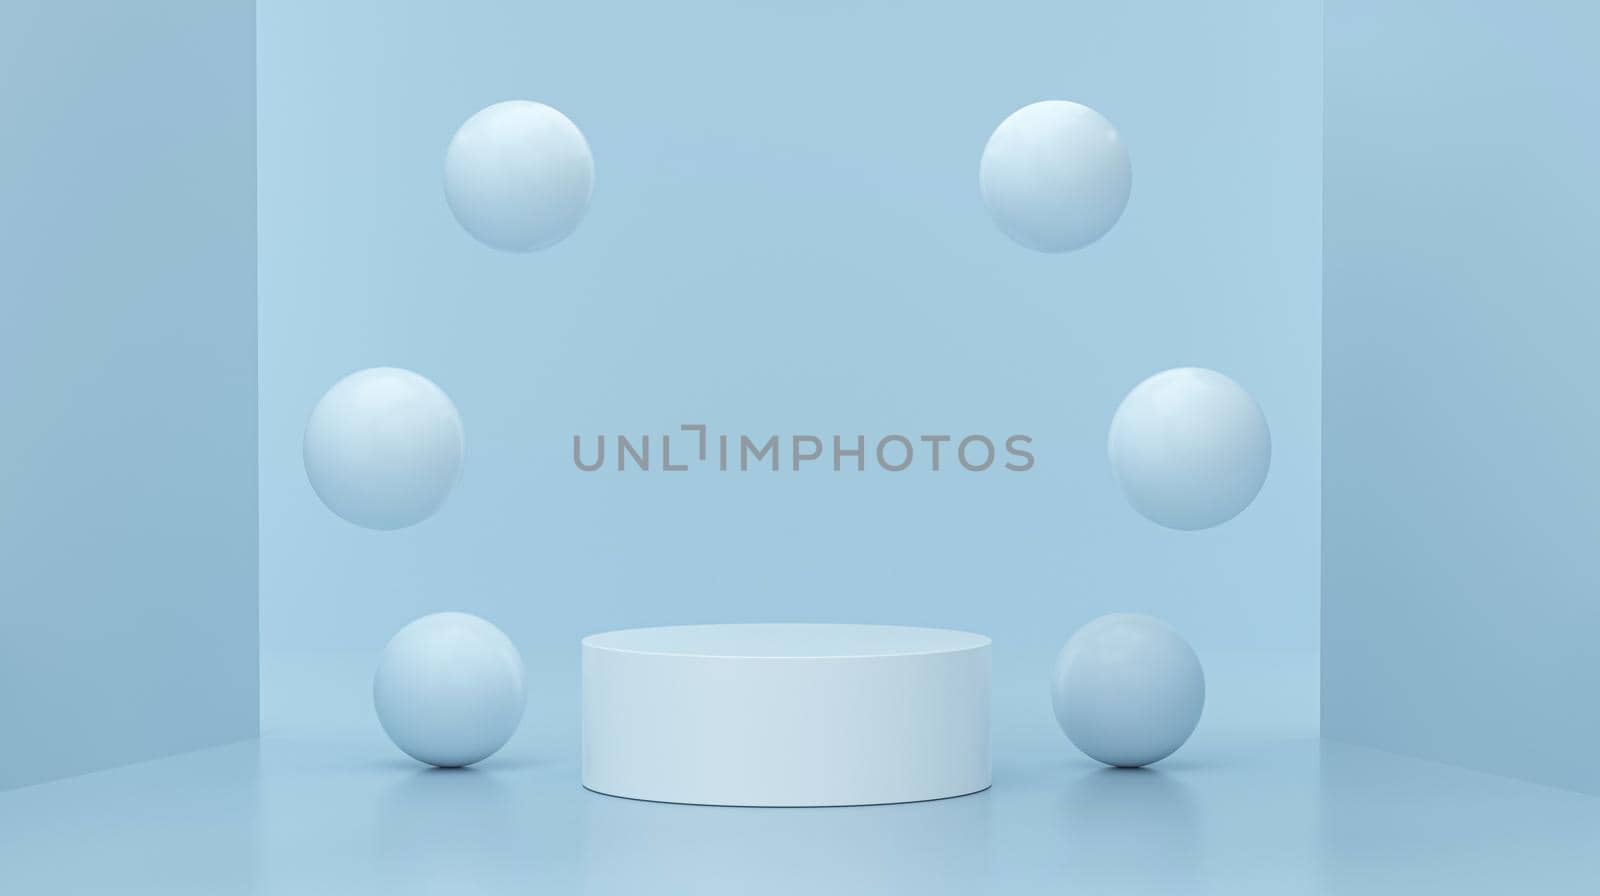 Mockup podium and bubbles around for product display. Premium presentation in blue background. 3d rendering.